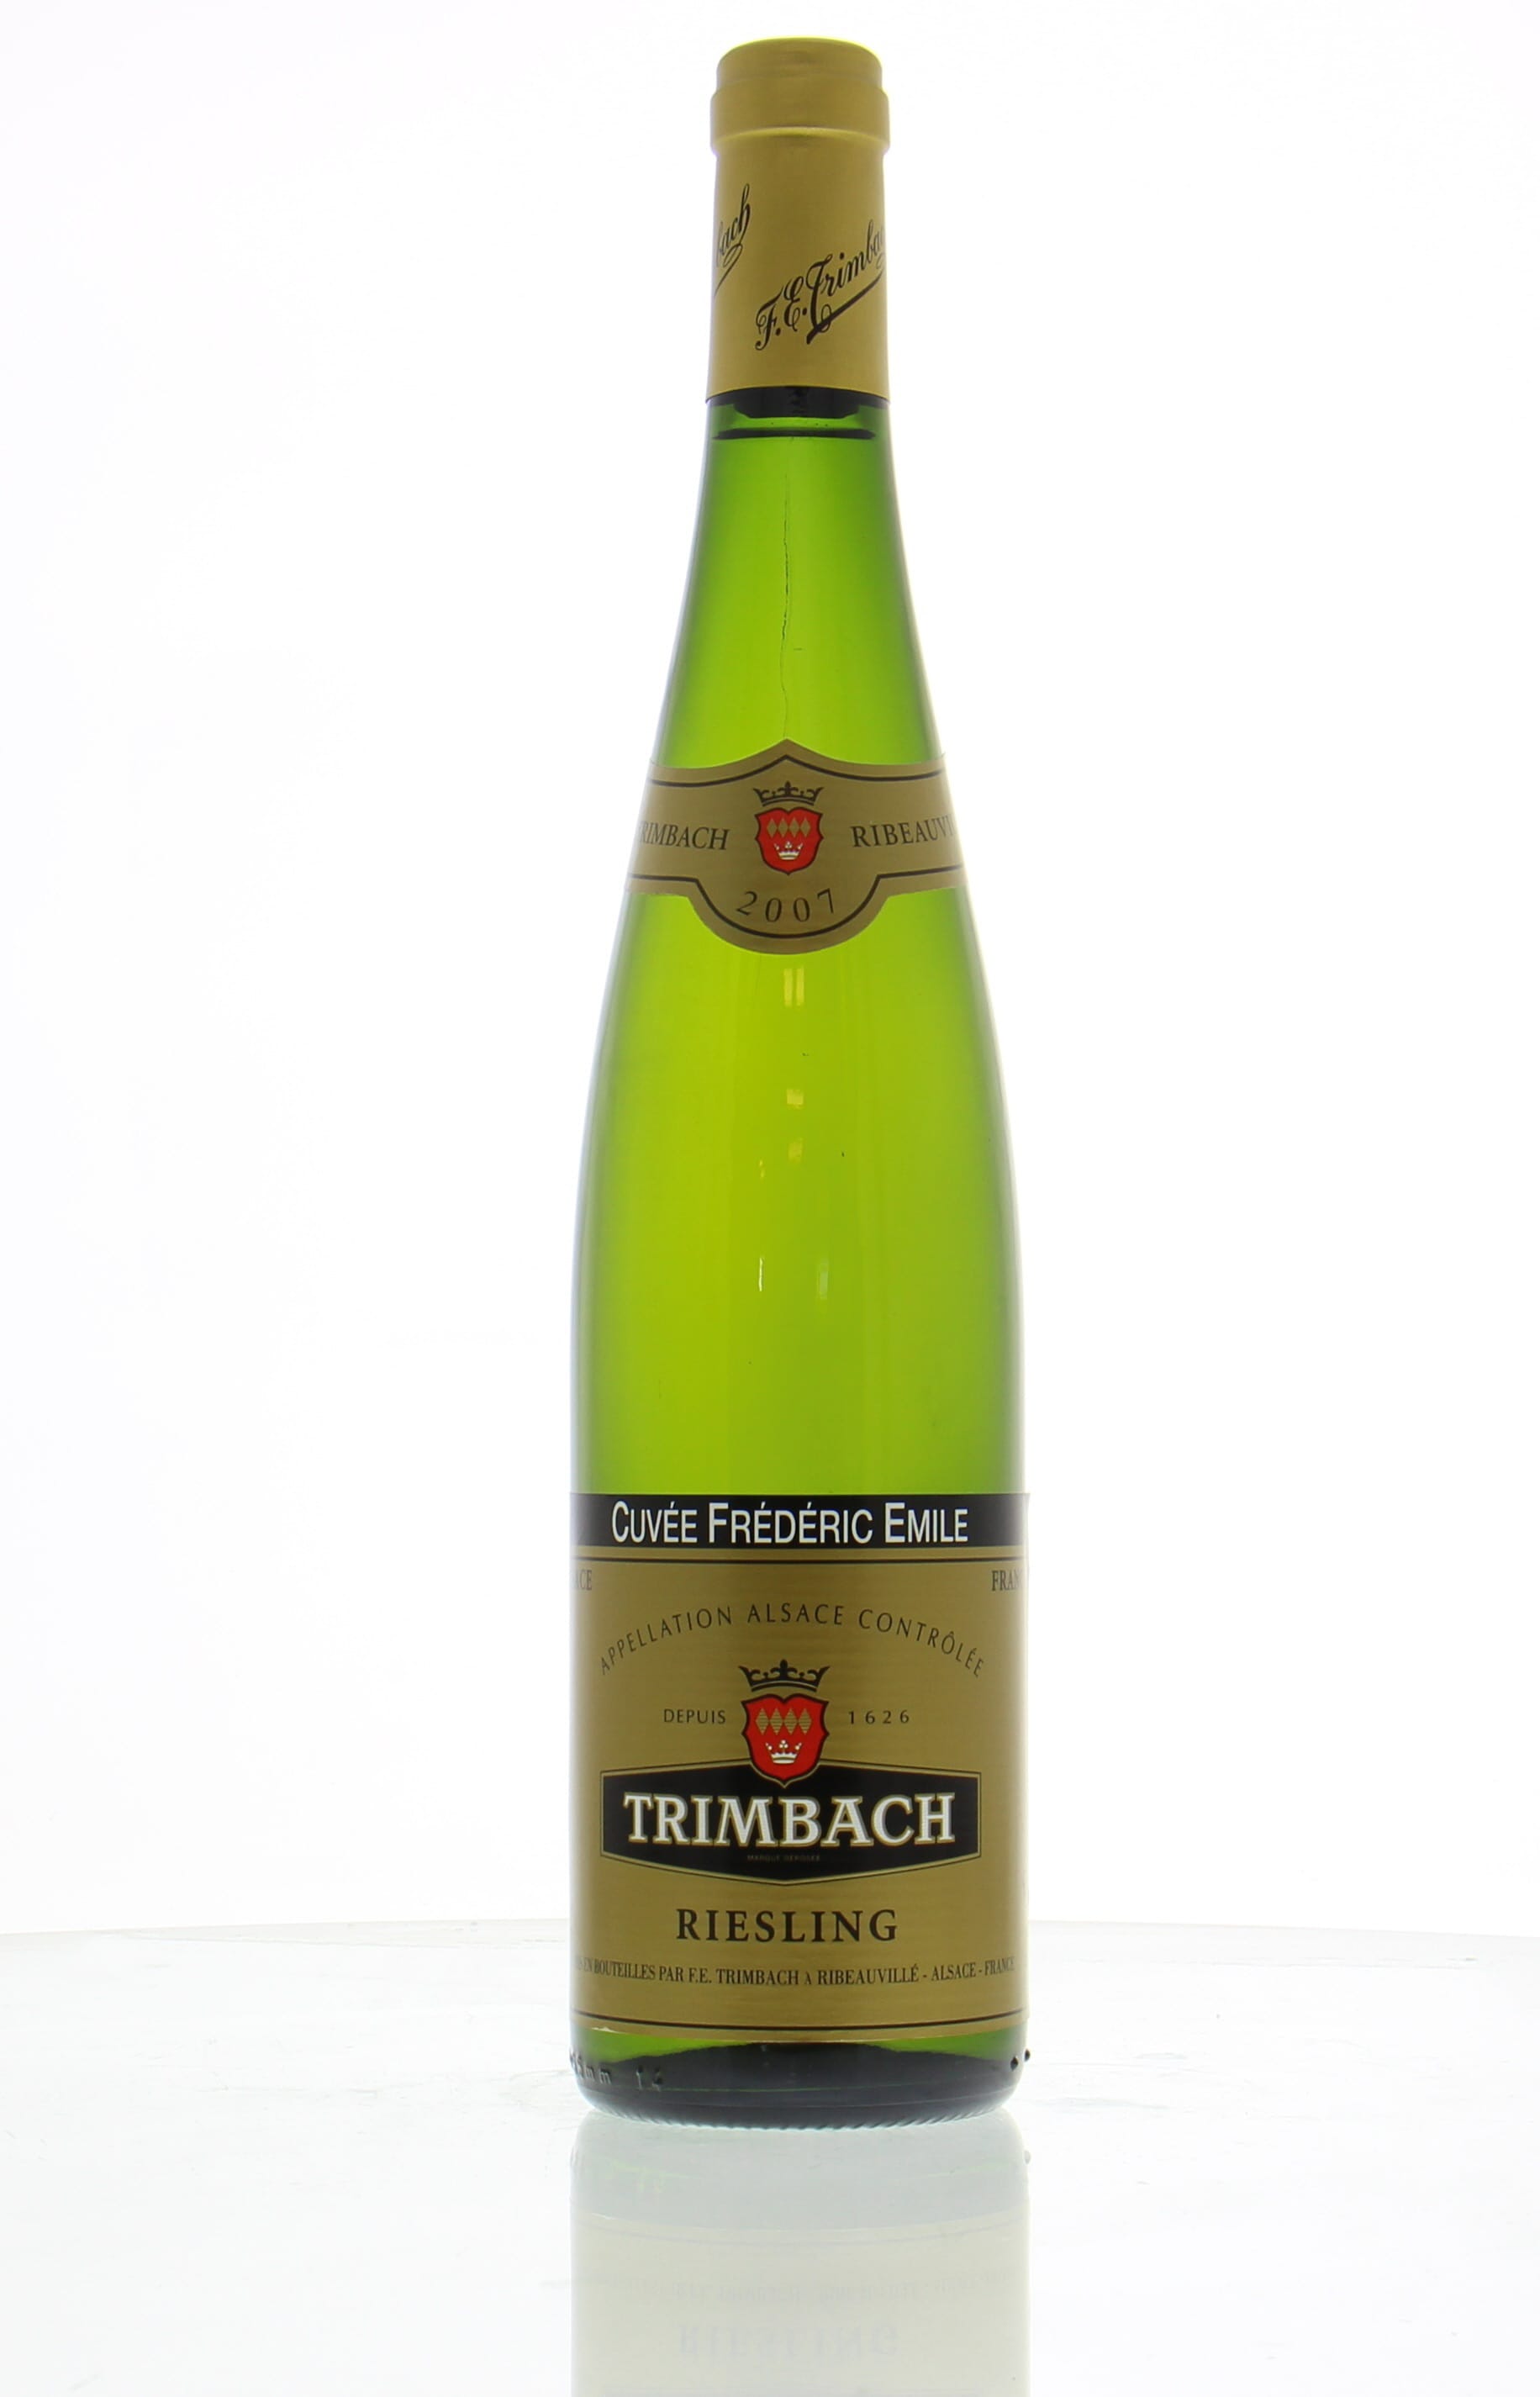 Trimbach - Riesling Cuvee Frederic Emile 2007 Perfect